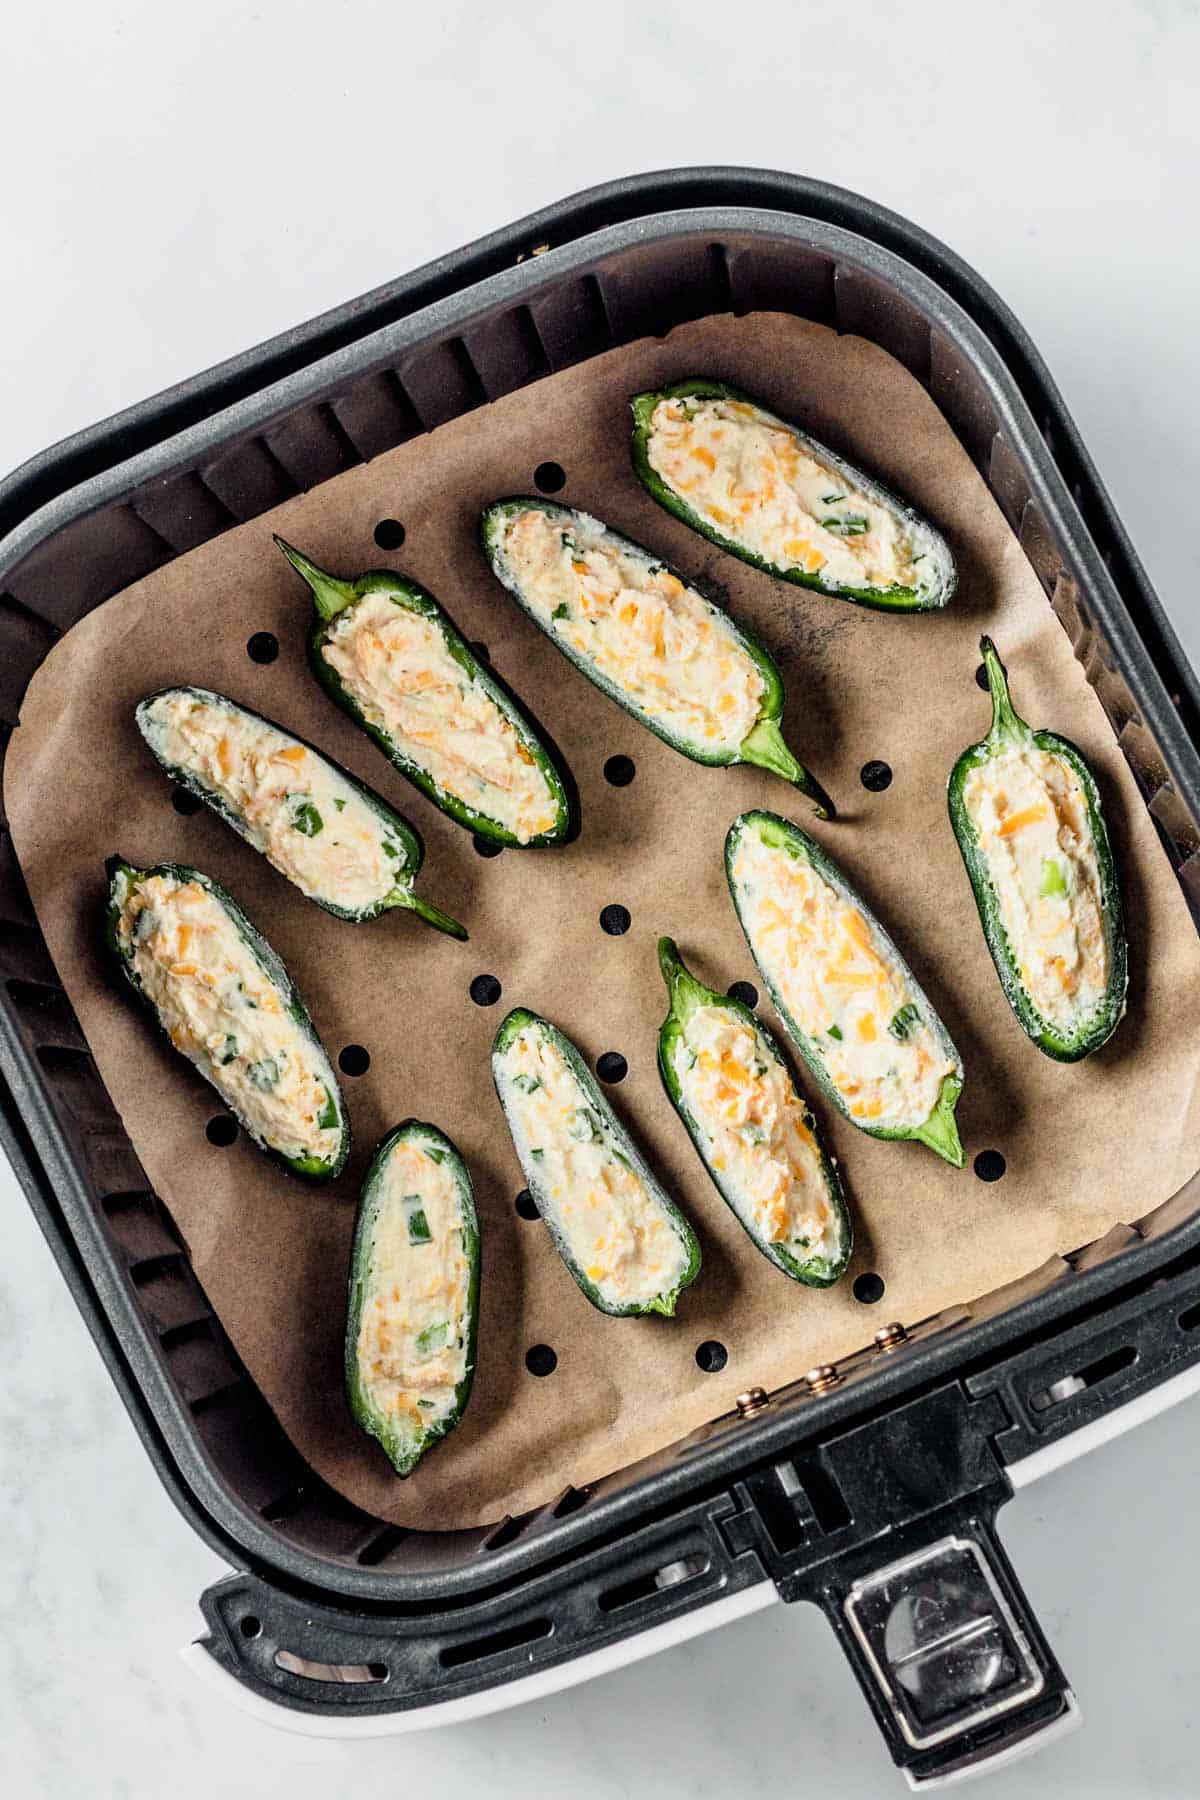 jalapeno poppers in air fryer before cooking